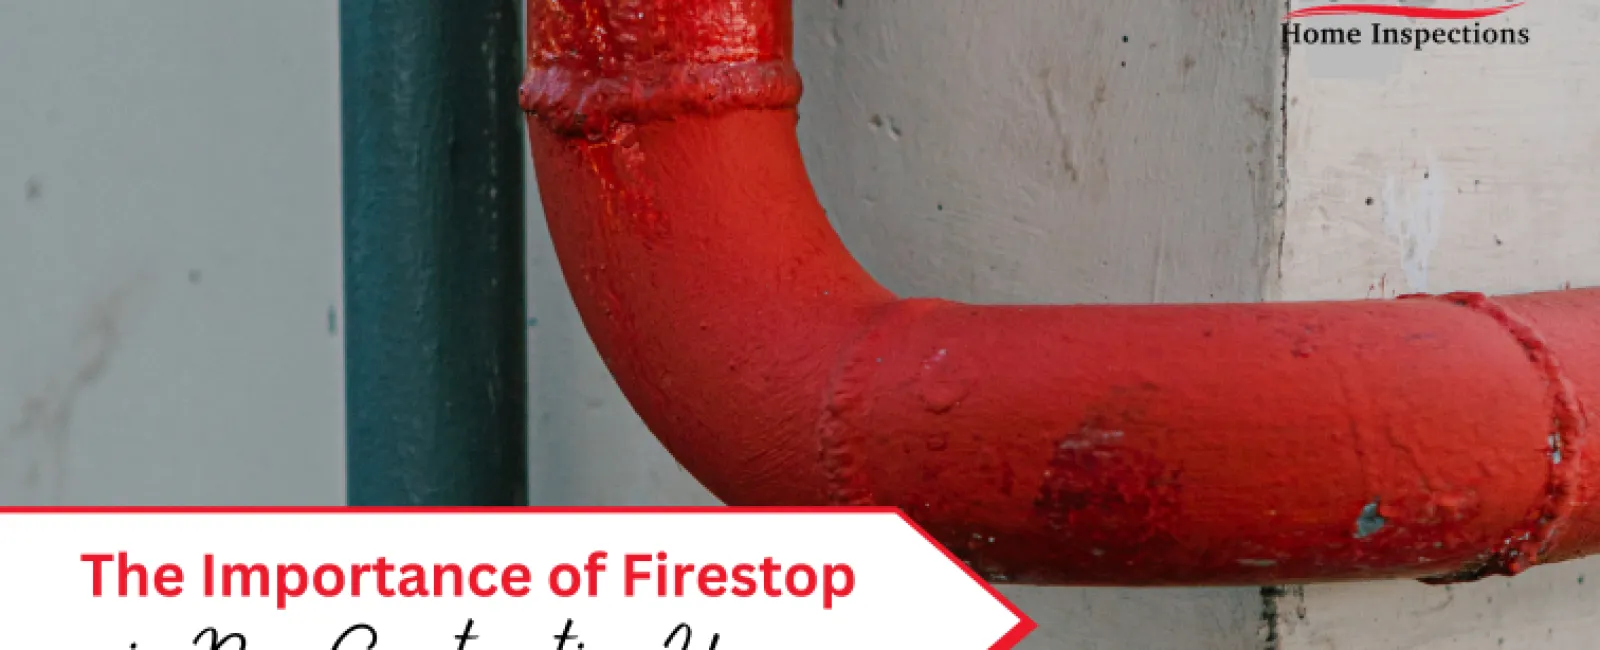 The Importance of Firestop in New Construction Homes